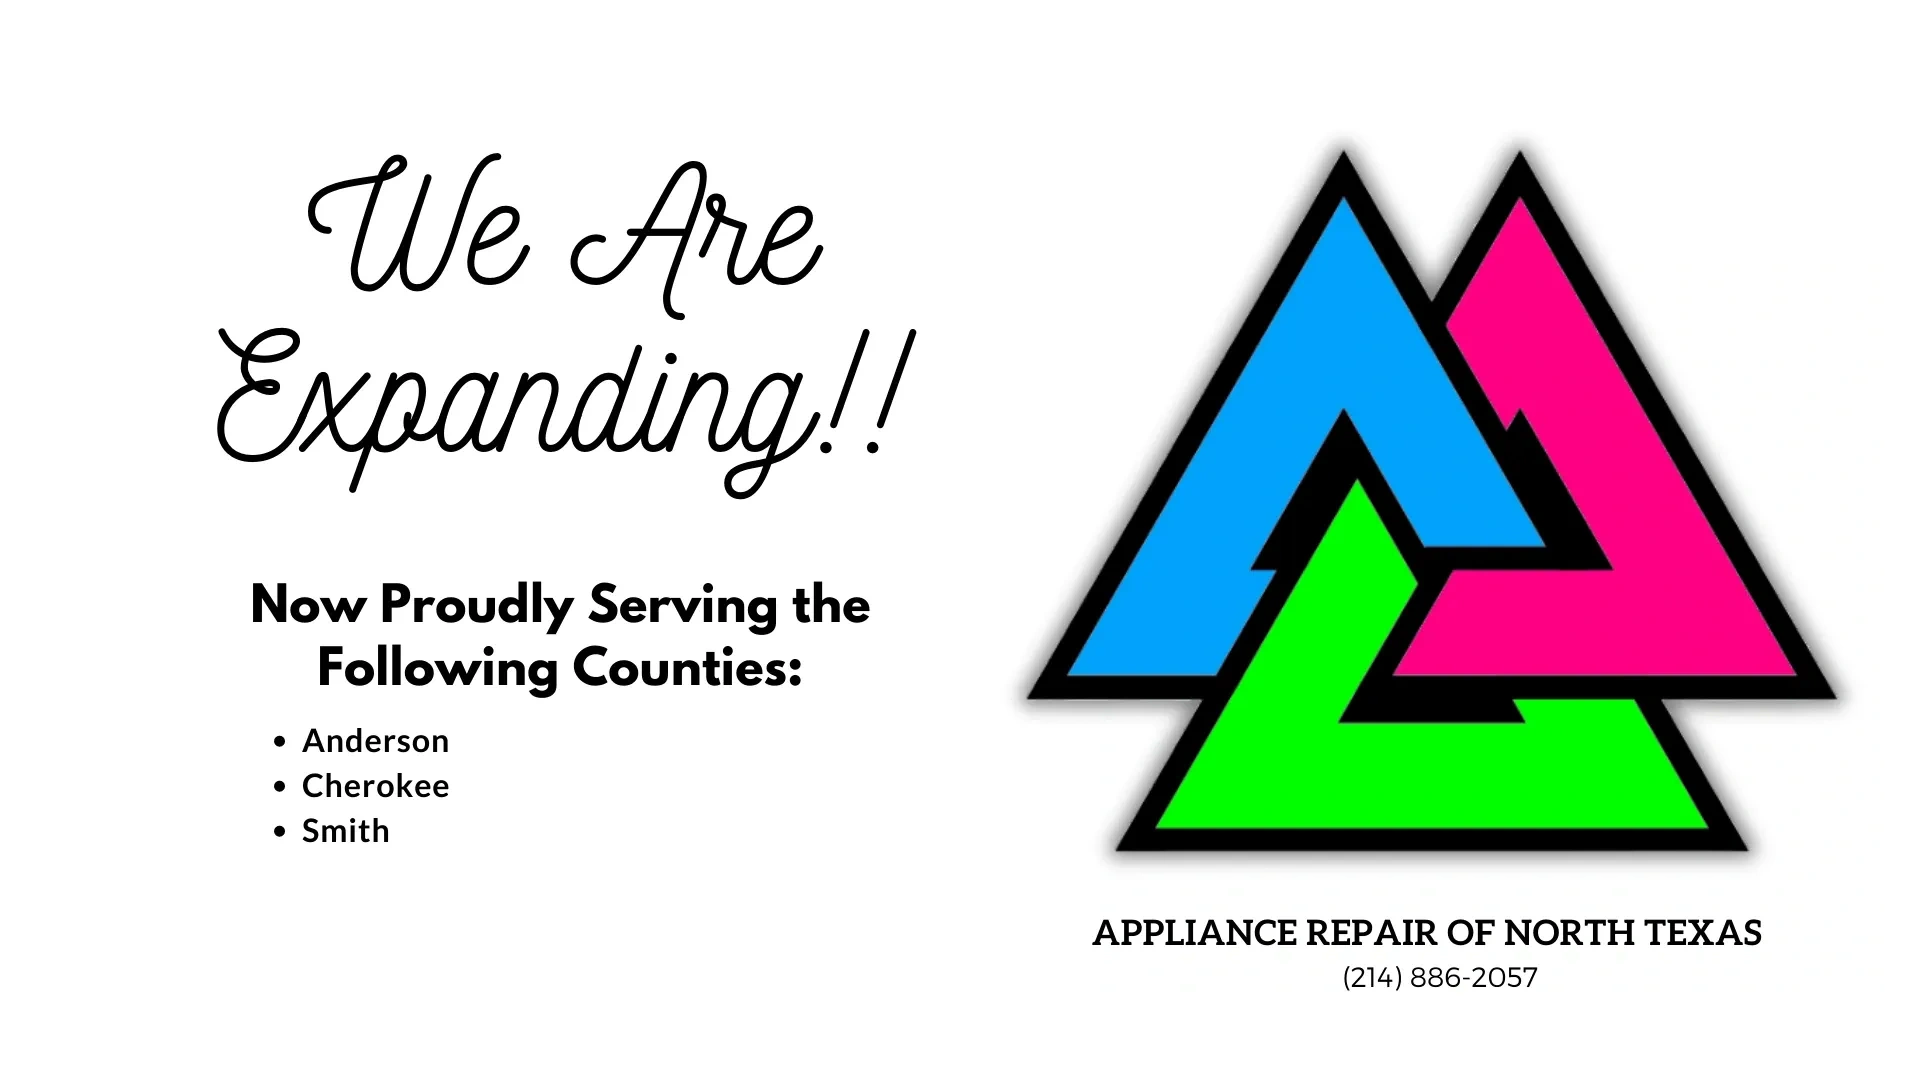 We are expanding to Anderson, Cherokee and Smith County, TX